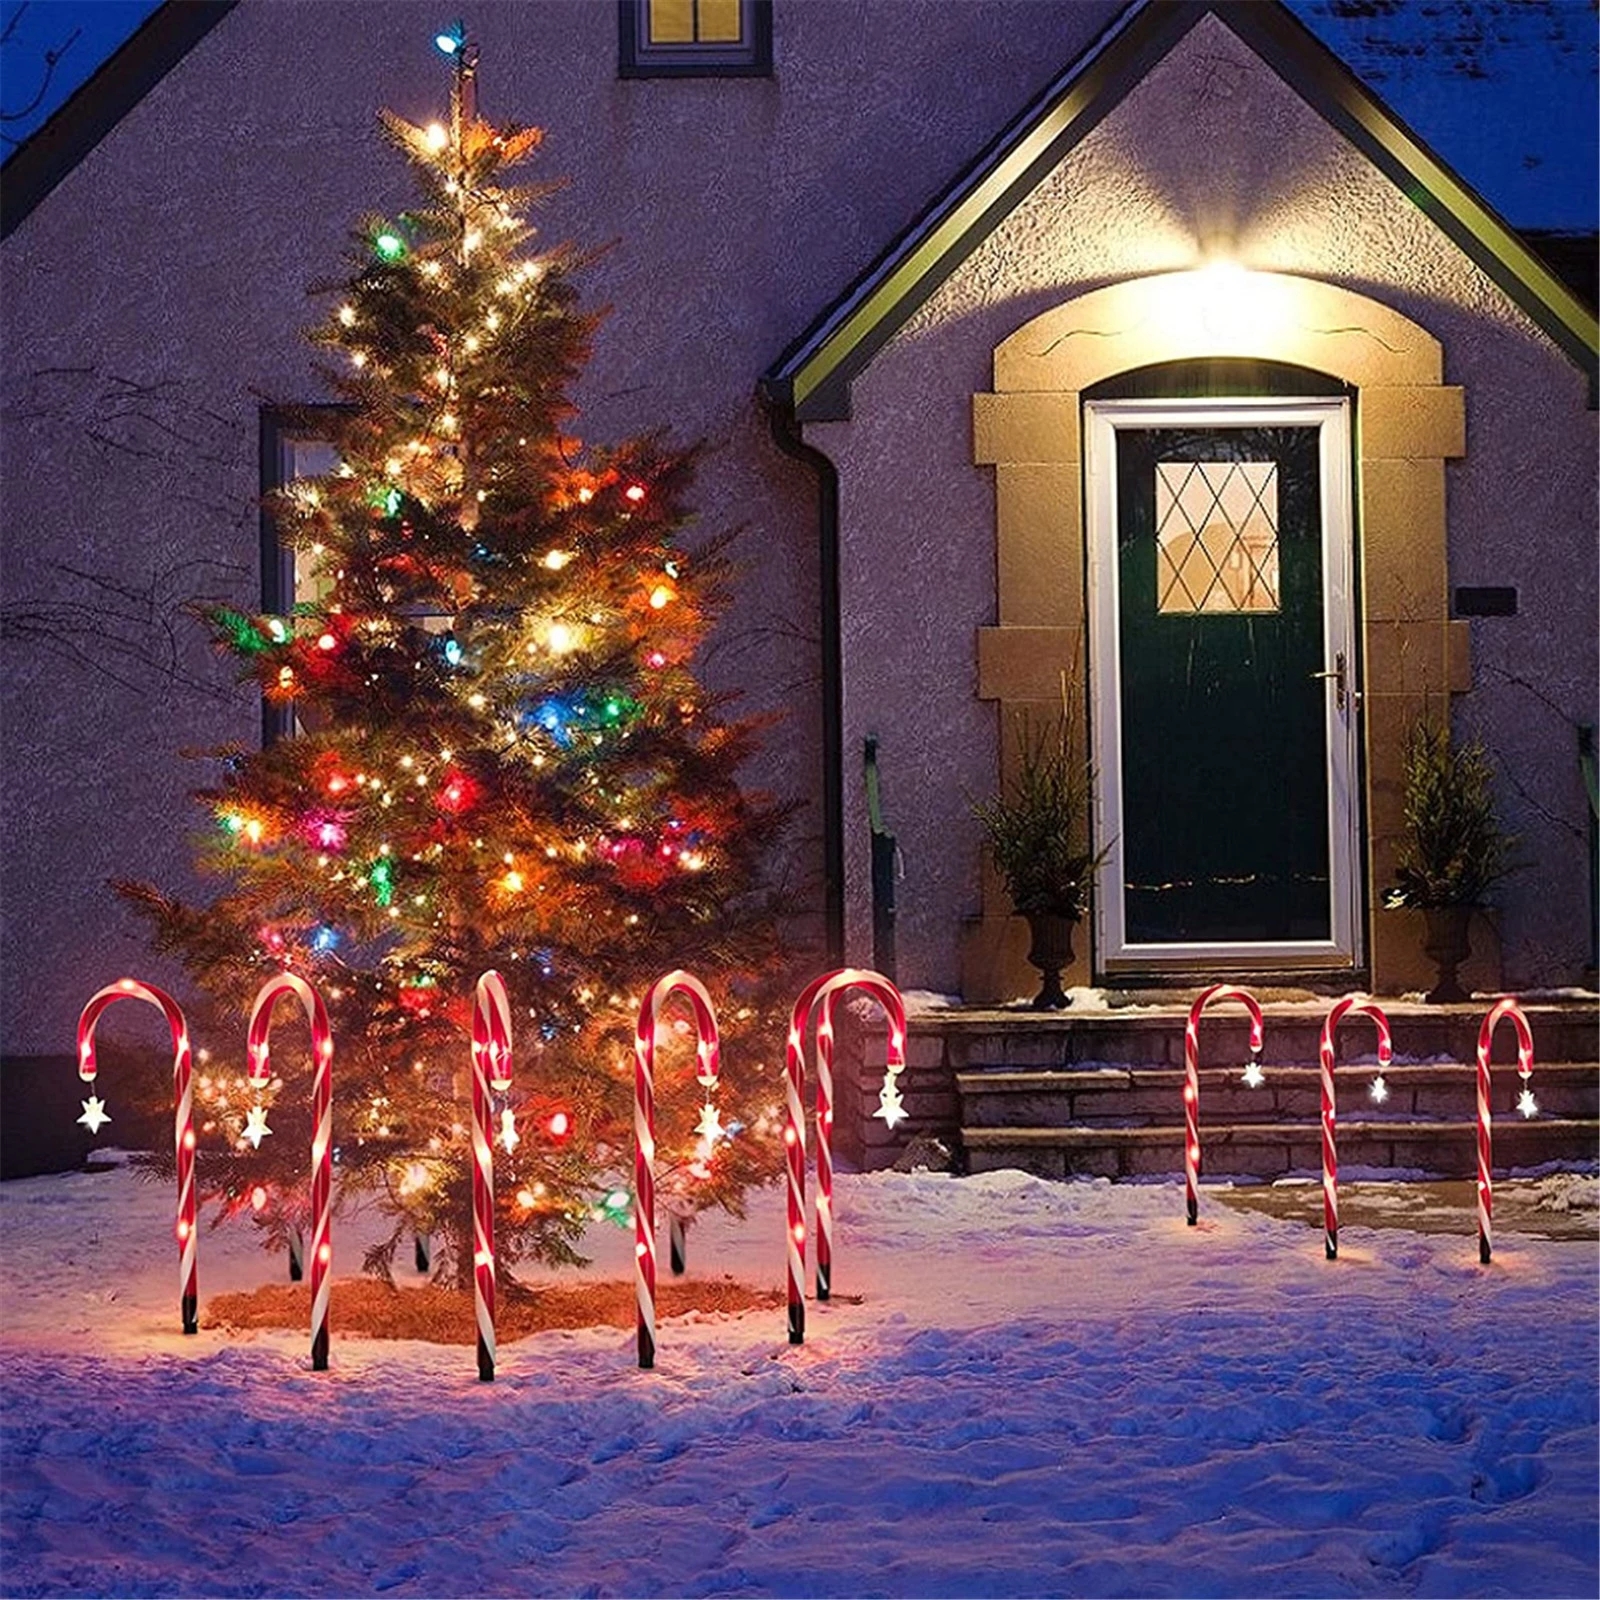 Christmas-LED-Candy-Star-Crutch-Lamp-Christmas-Solar-Lawn-Lamp-Outdoor-In-Ground-Lights-Christmas-Tr-1913952-7